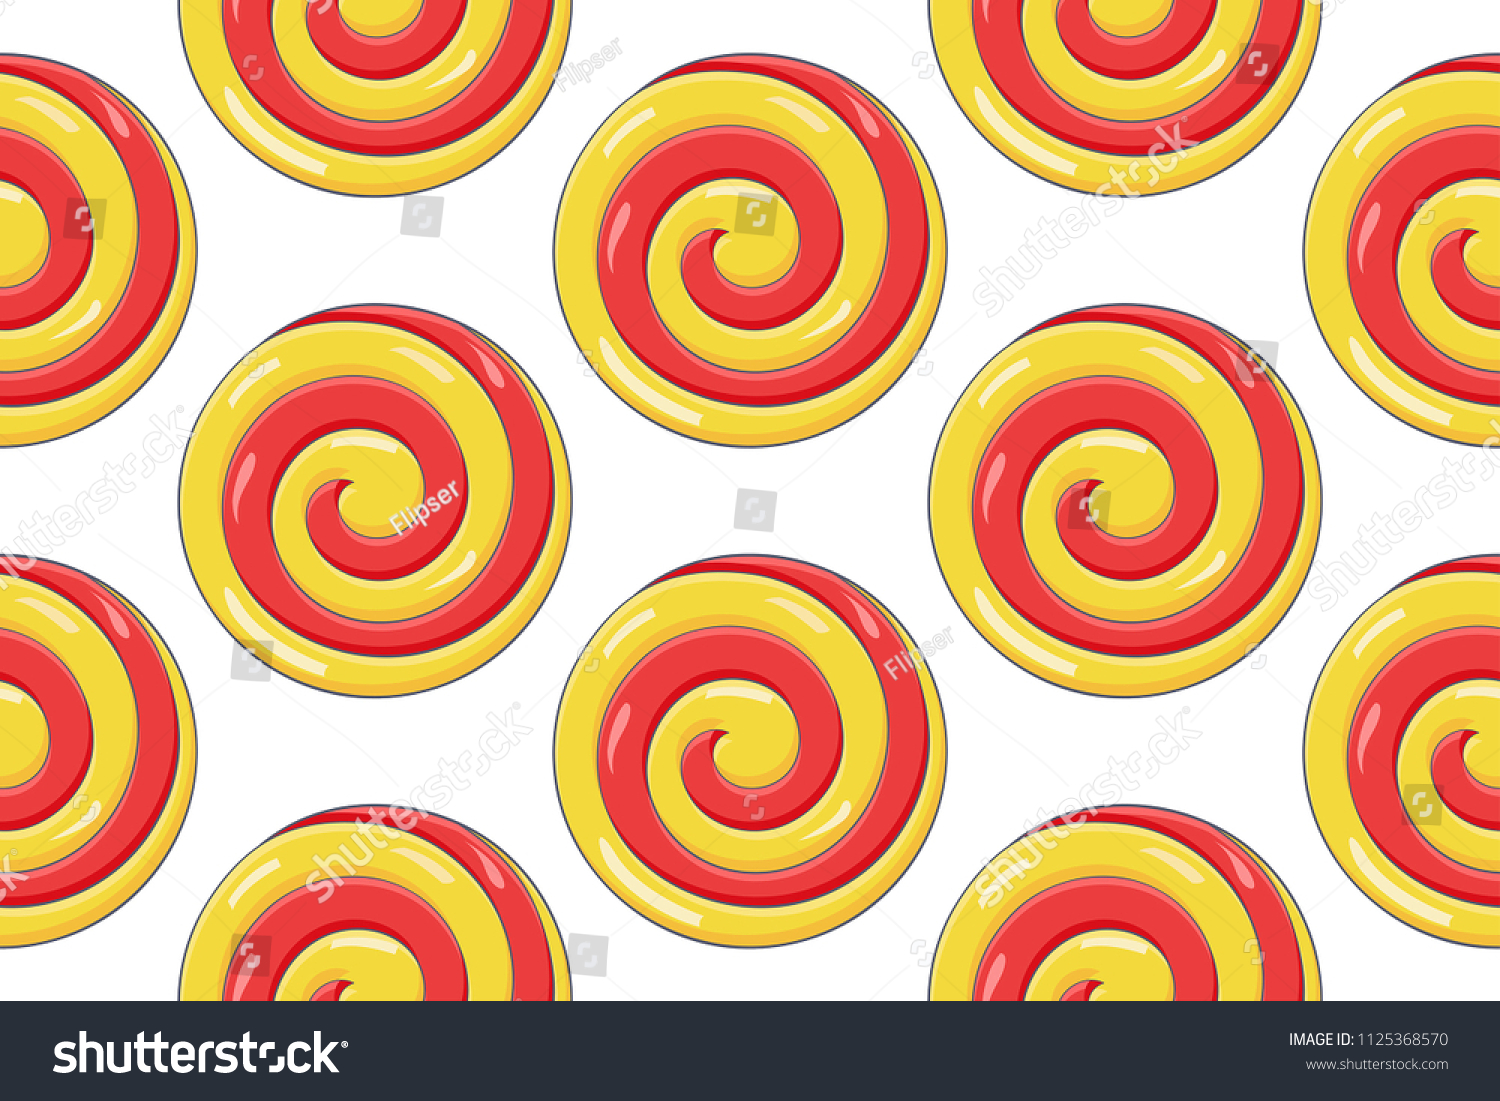 Download Swirl Lollipop Red Yellow Sugar Candy Stock Vector Royalty Free 1125368570 PSD Mockup Templates